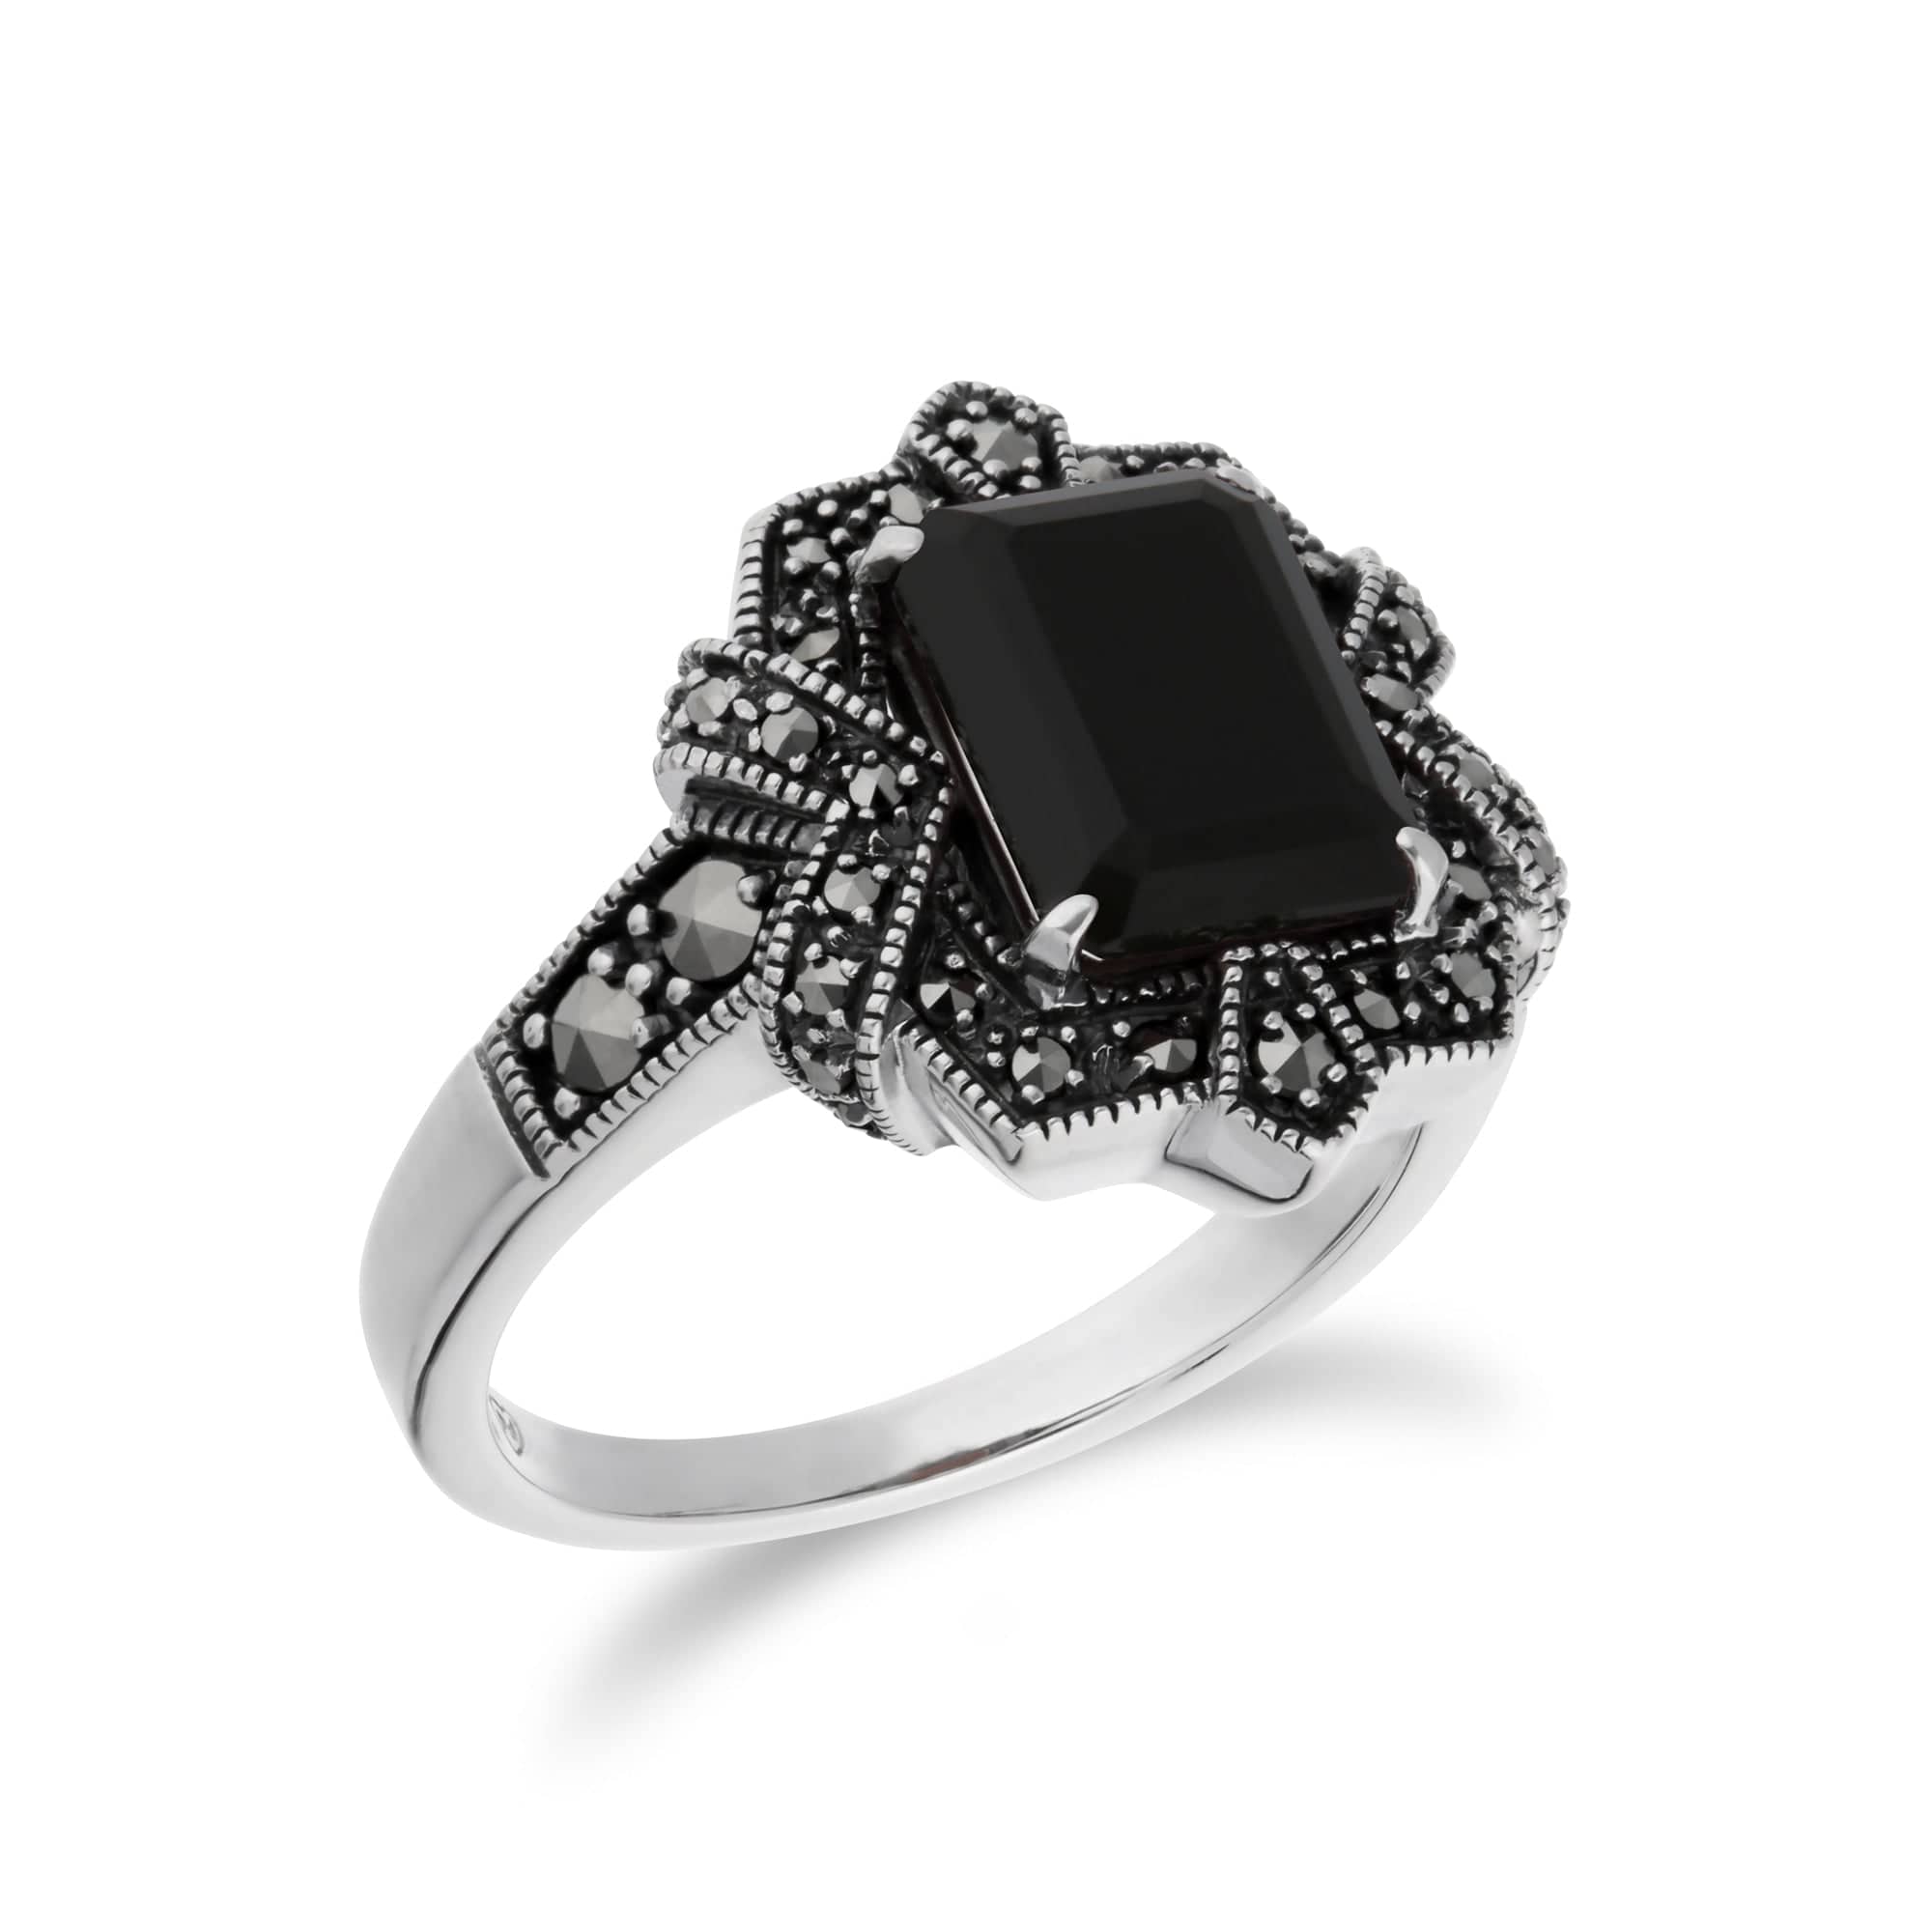 214R570807925 Art Deco Style Baguette Black Onyx & Marcasite Ring in 925 Sterling Silver 2